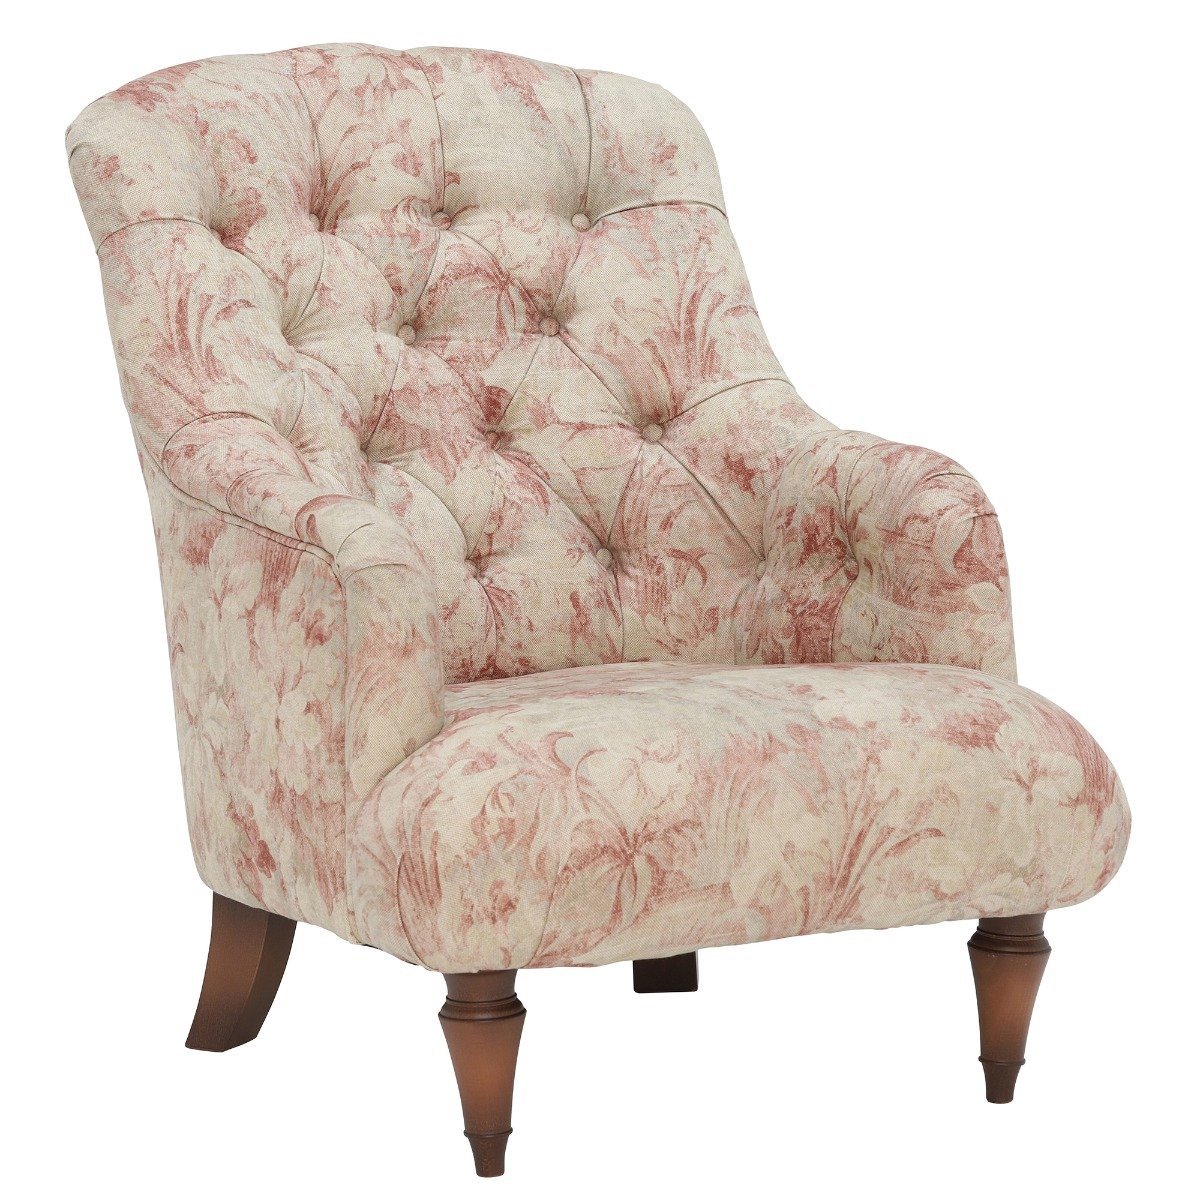 Stowe Button Accent Chair, Pink Fabric | Barker & Stonehouse